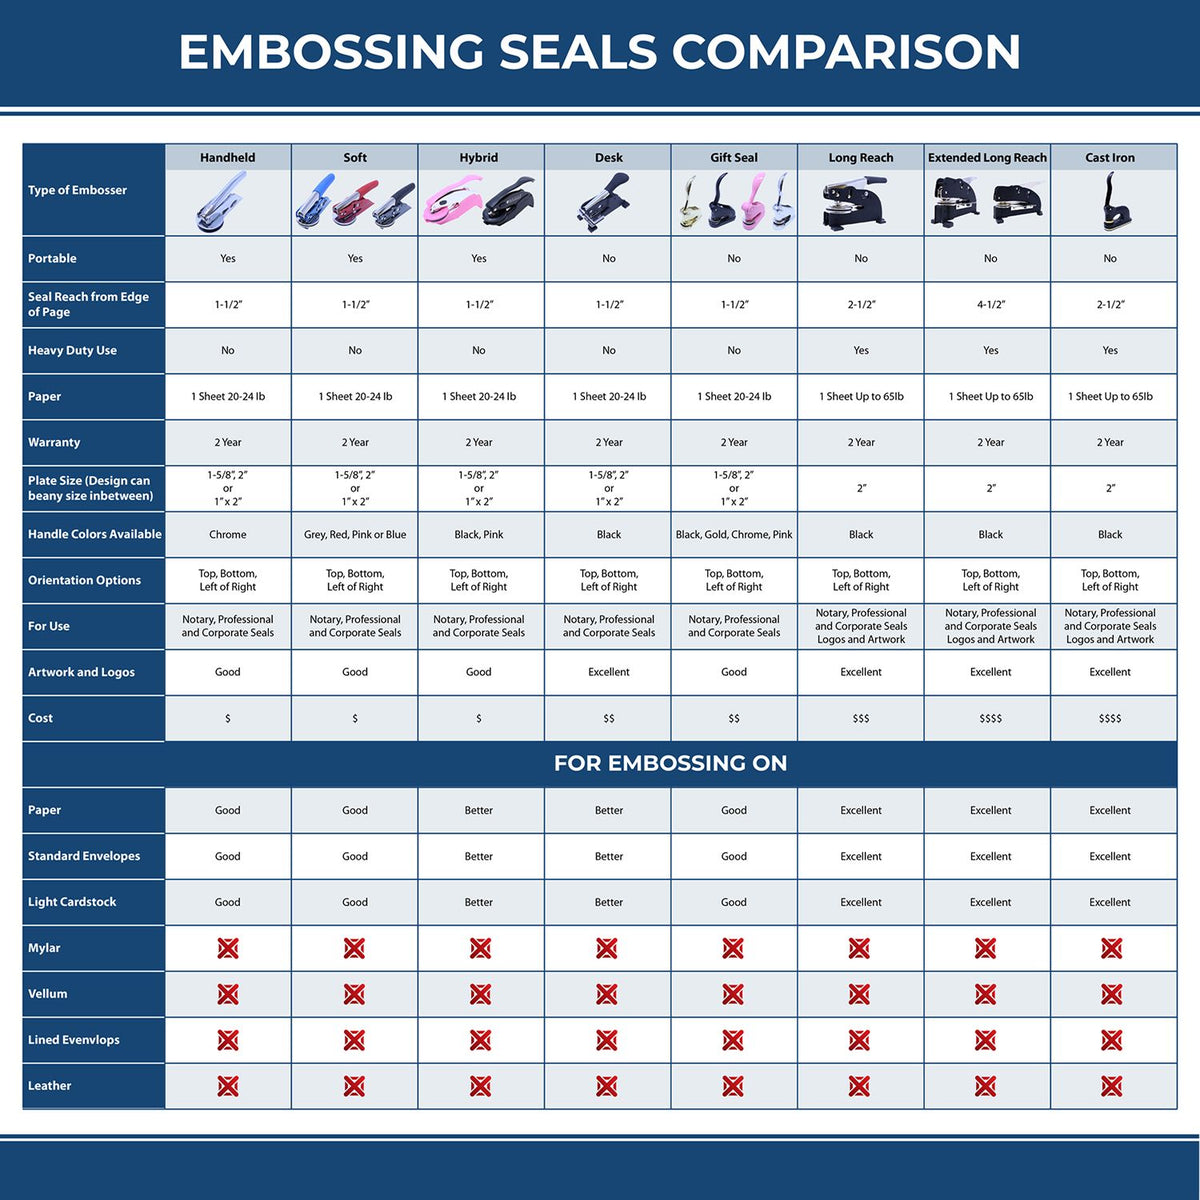 A comparison chart for the different types of mount models available for the Heavy Duty Cast Iron Oklahoma Architect Embosser.